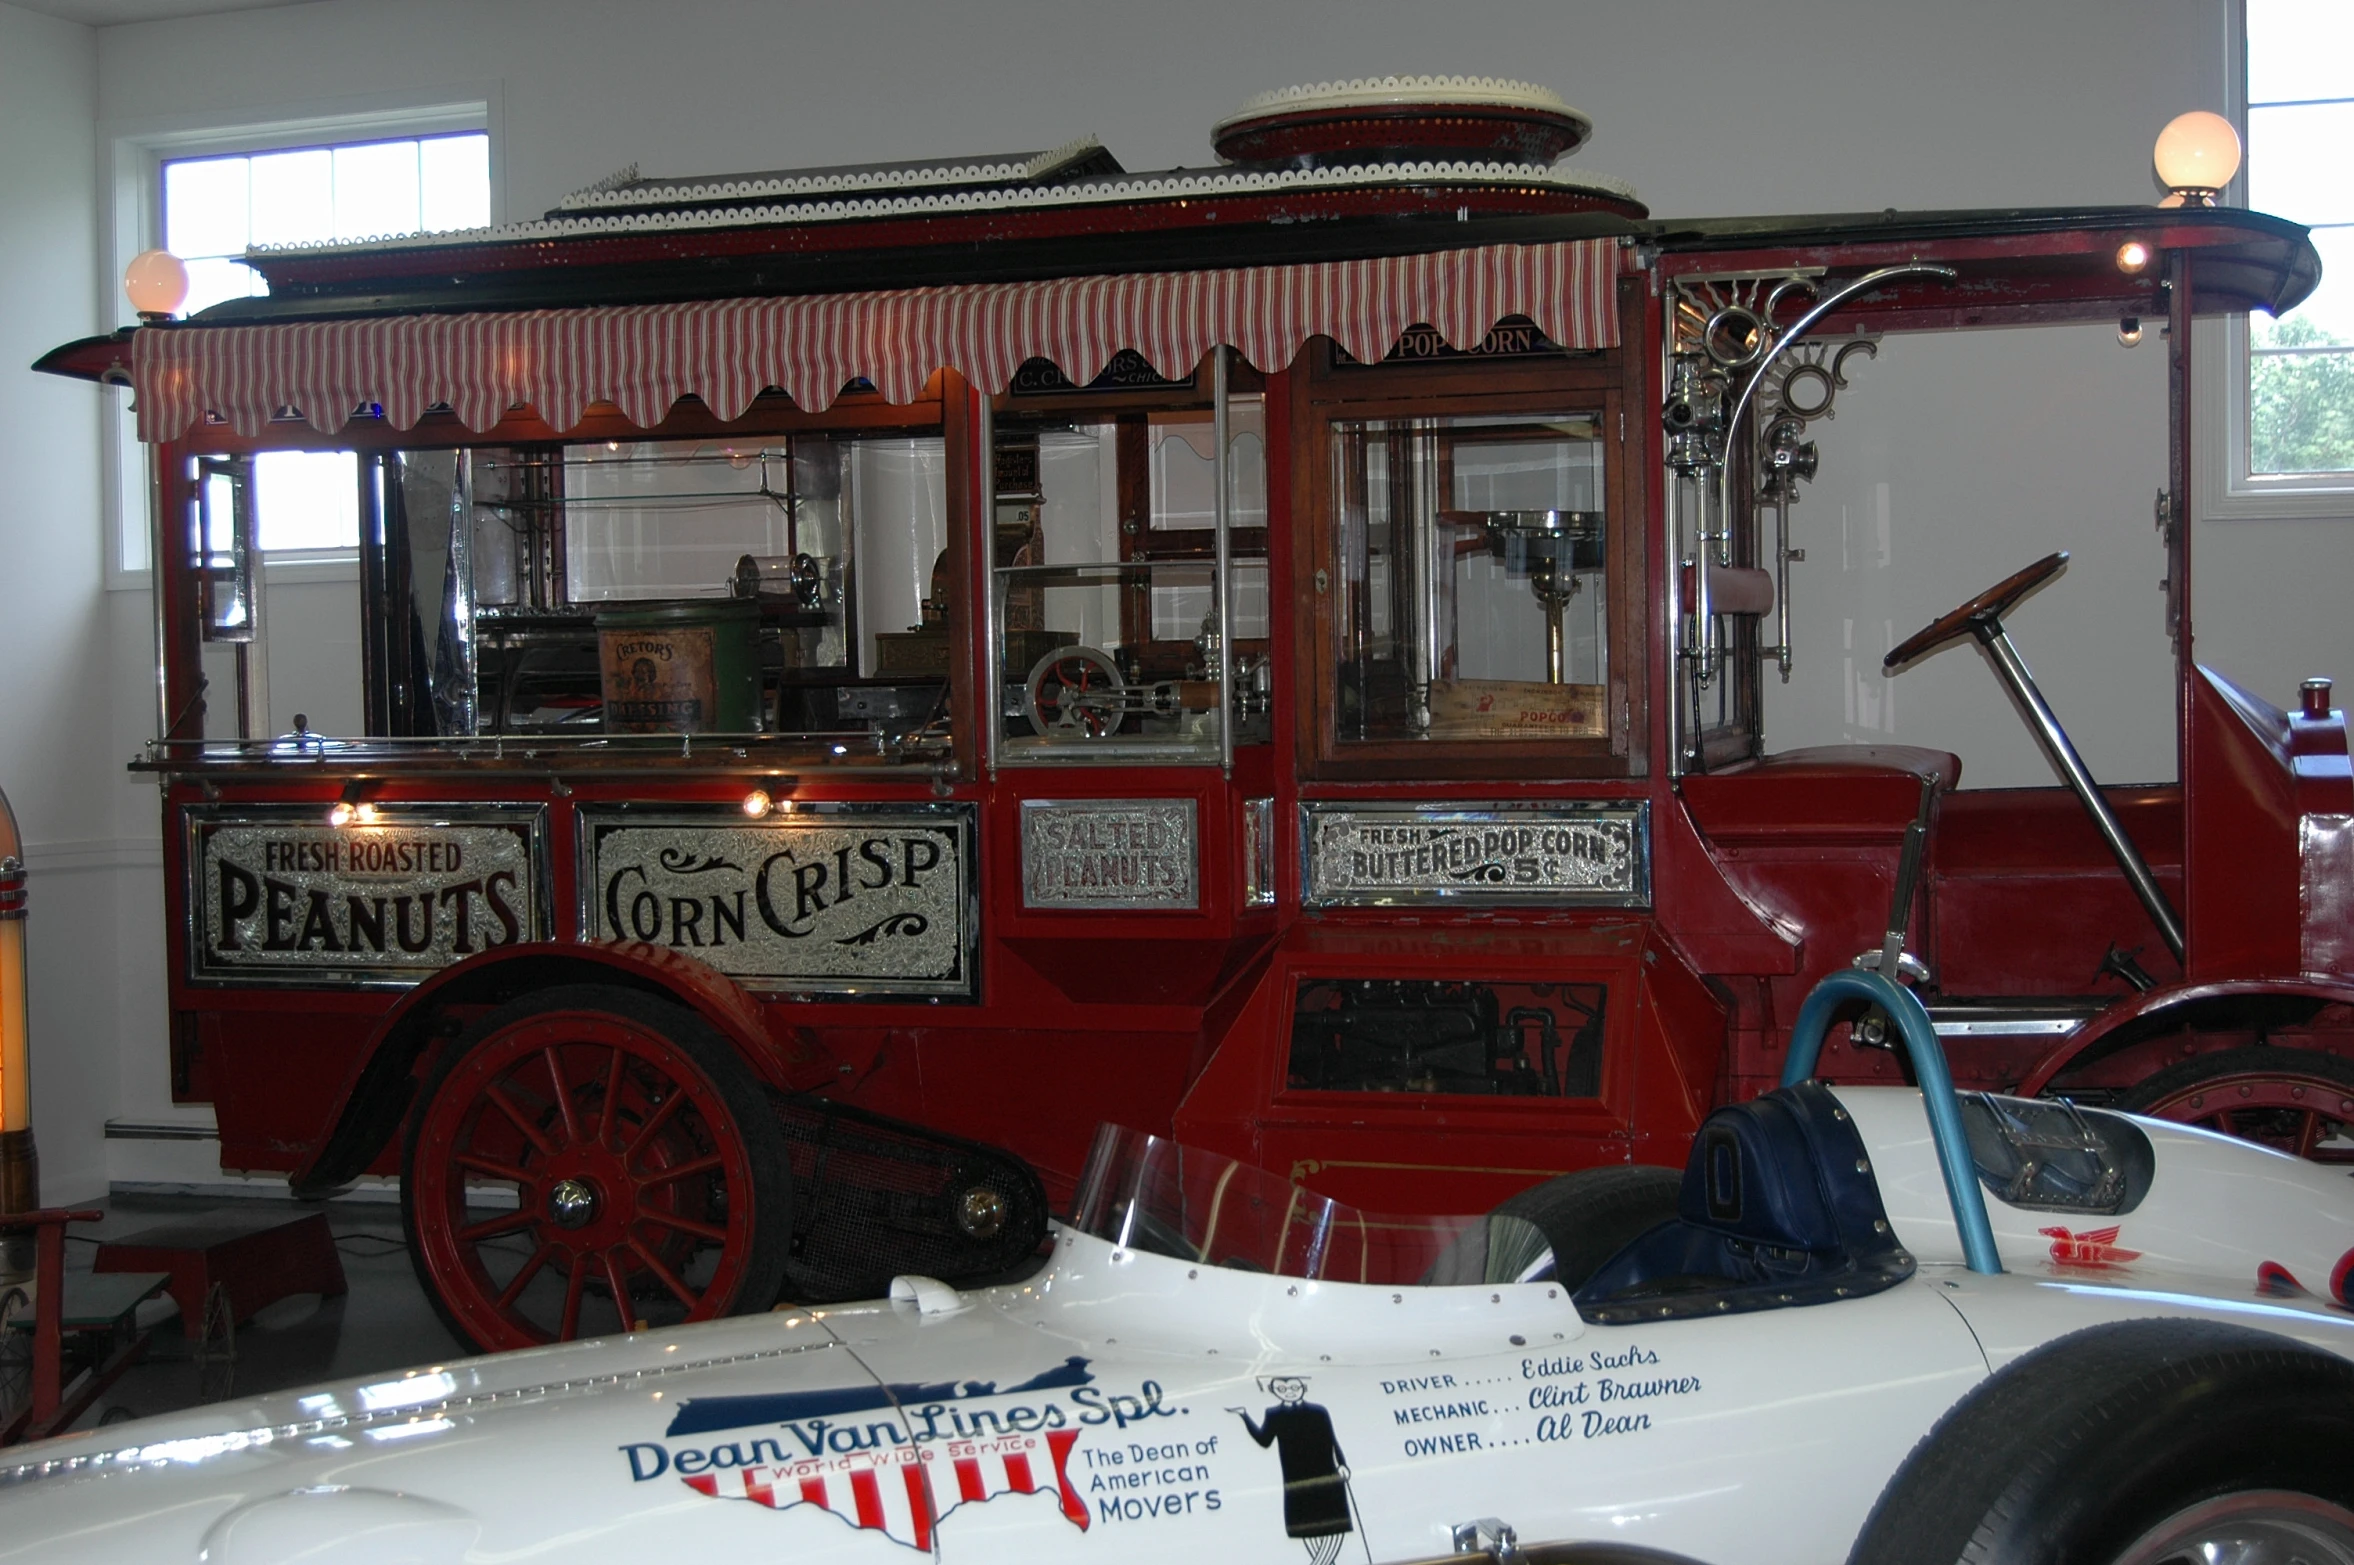 the old style trolley is for adults and children